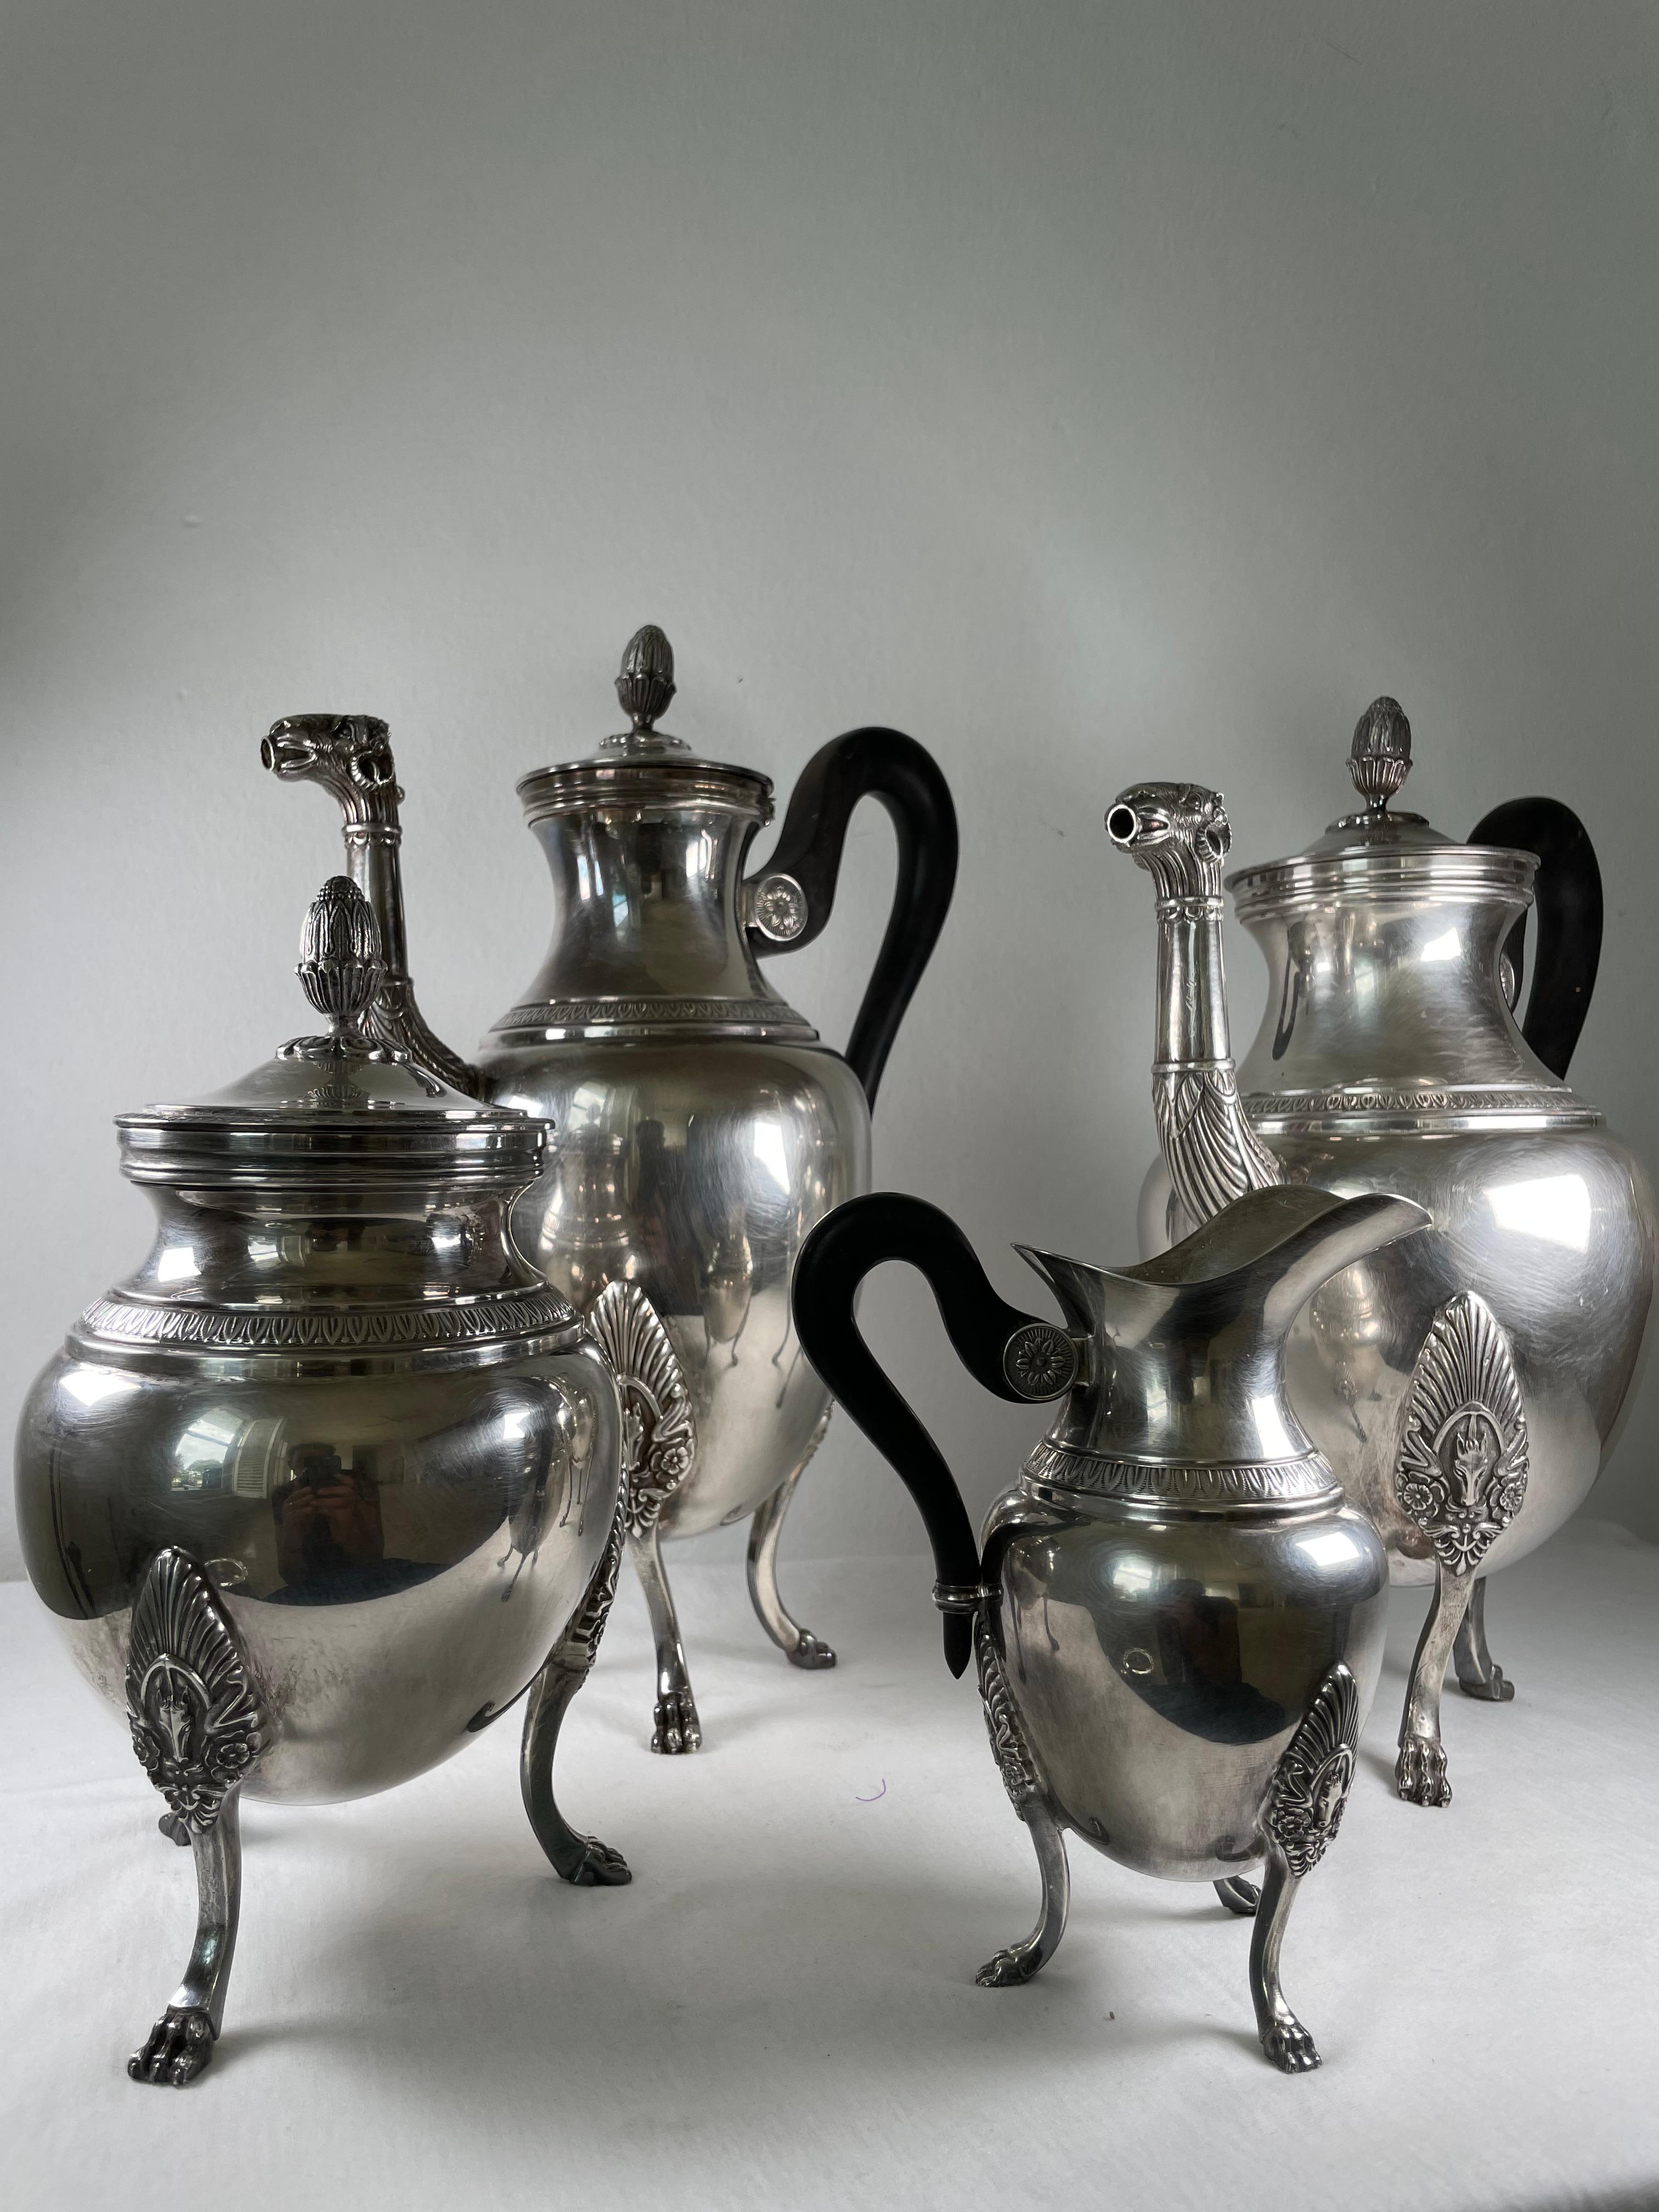 A Christofle 'Malmaison Empire' four-piece coffee and tea set. It features a black-handled teapot and coffee pot, both of which have camel head-shaped spouts, and a lidded sugar bowl and milk pot. All of the pieces Stand on three decorative feet